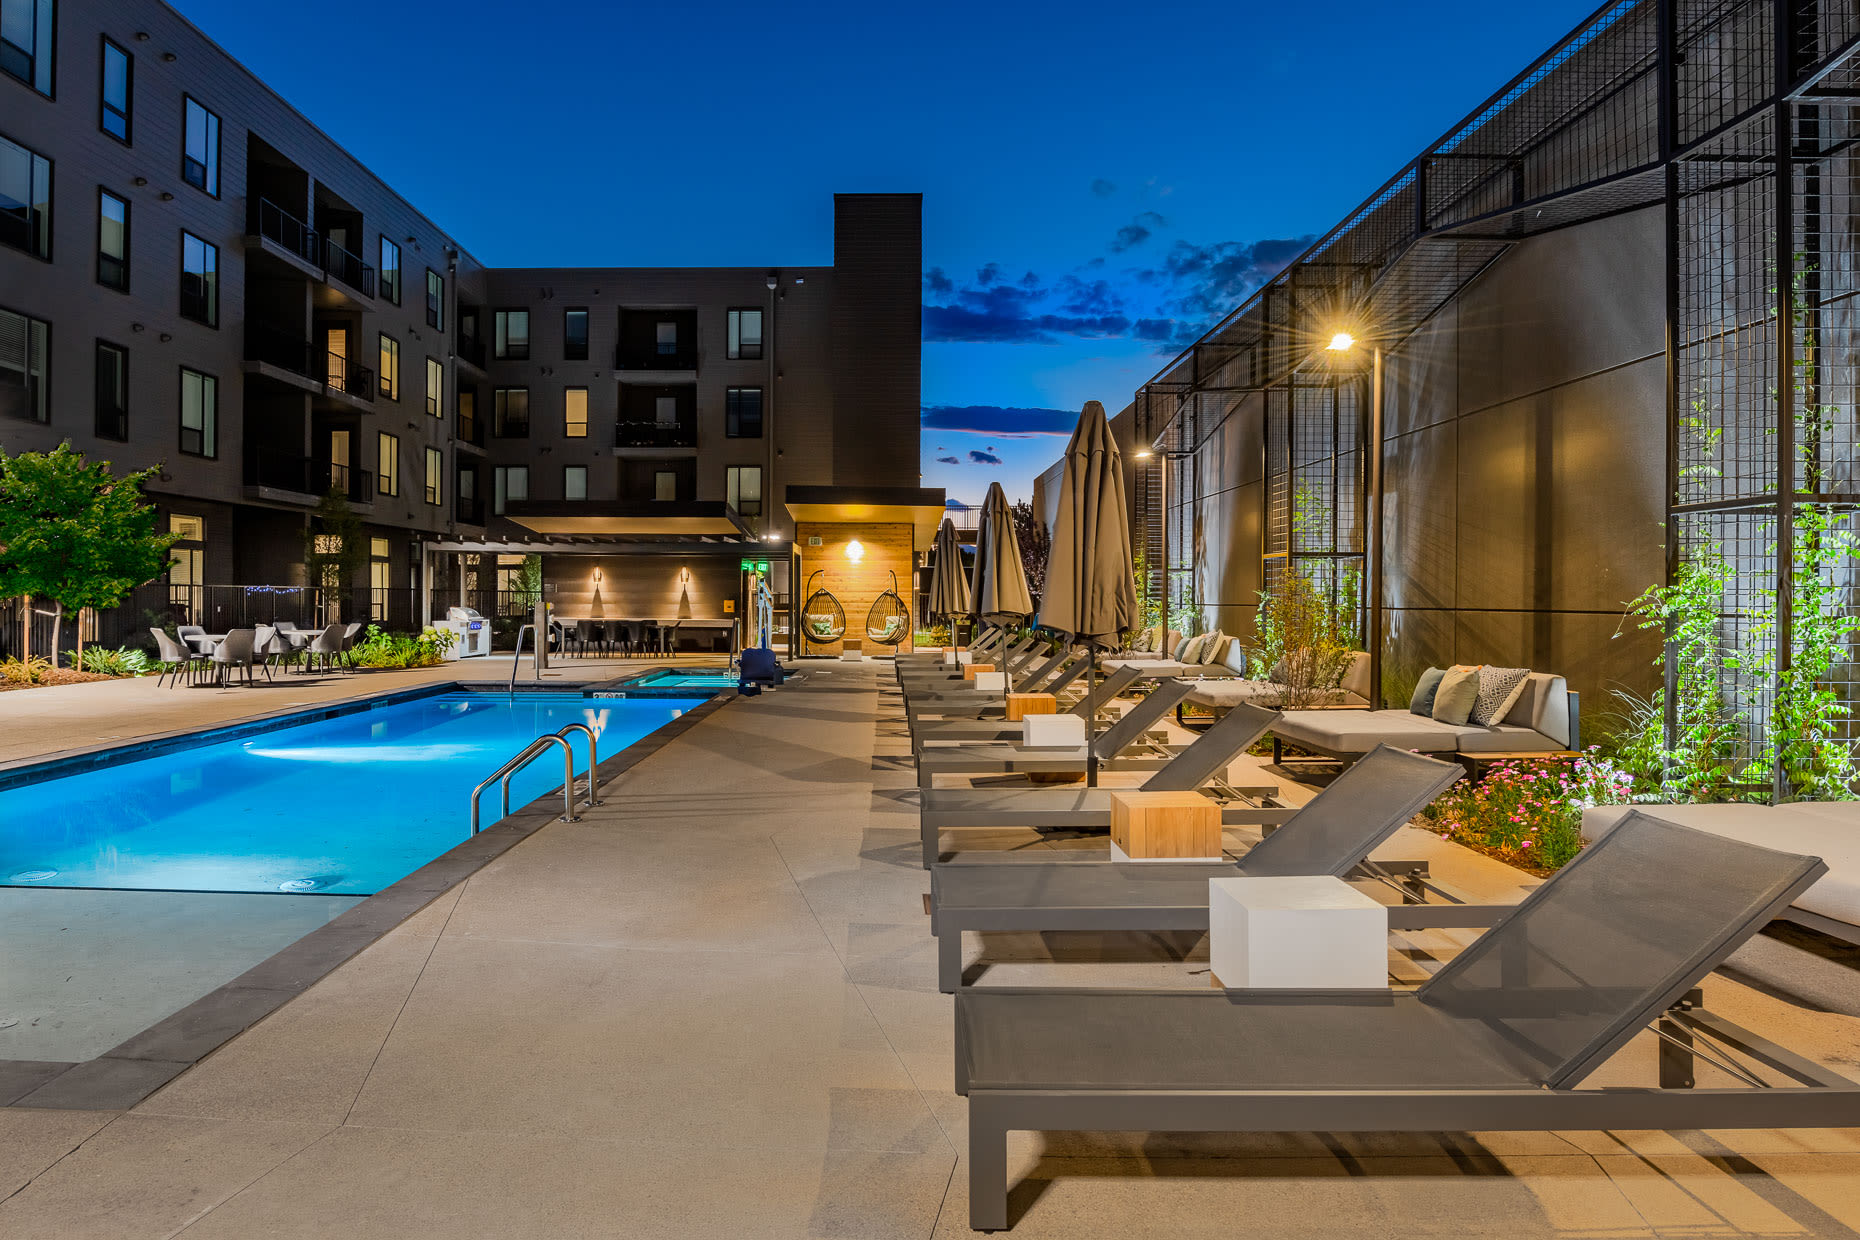 Spacious sitting area by pool with lounge chairs at West 38 in Wheat Ridge, Colorado